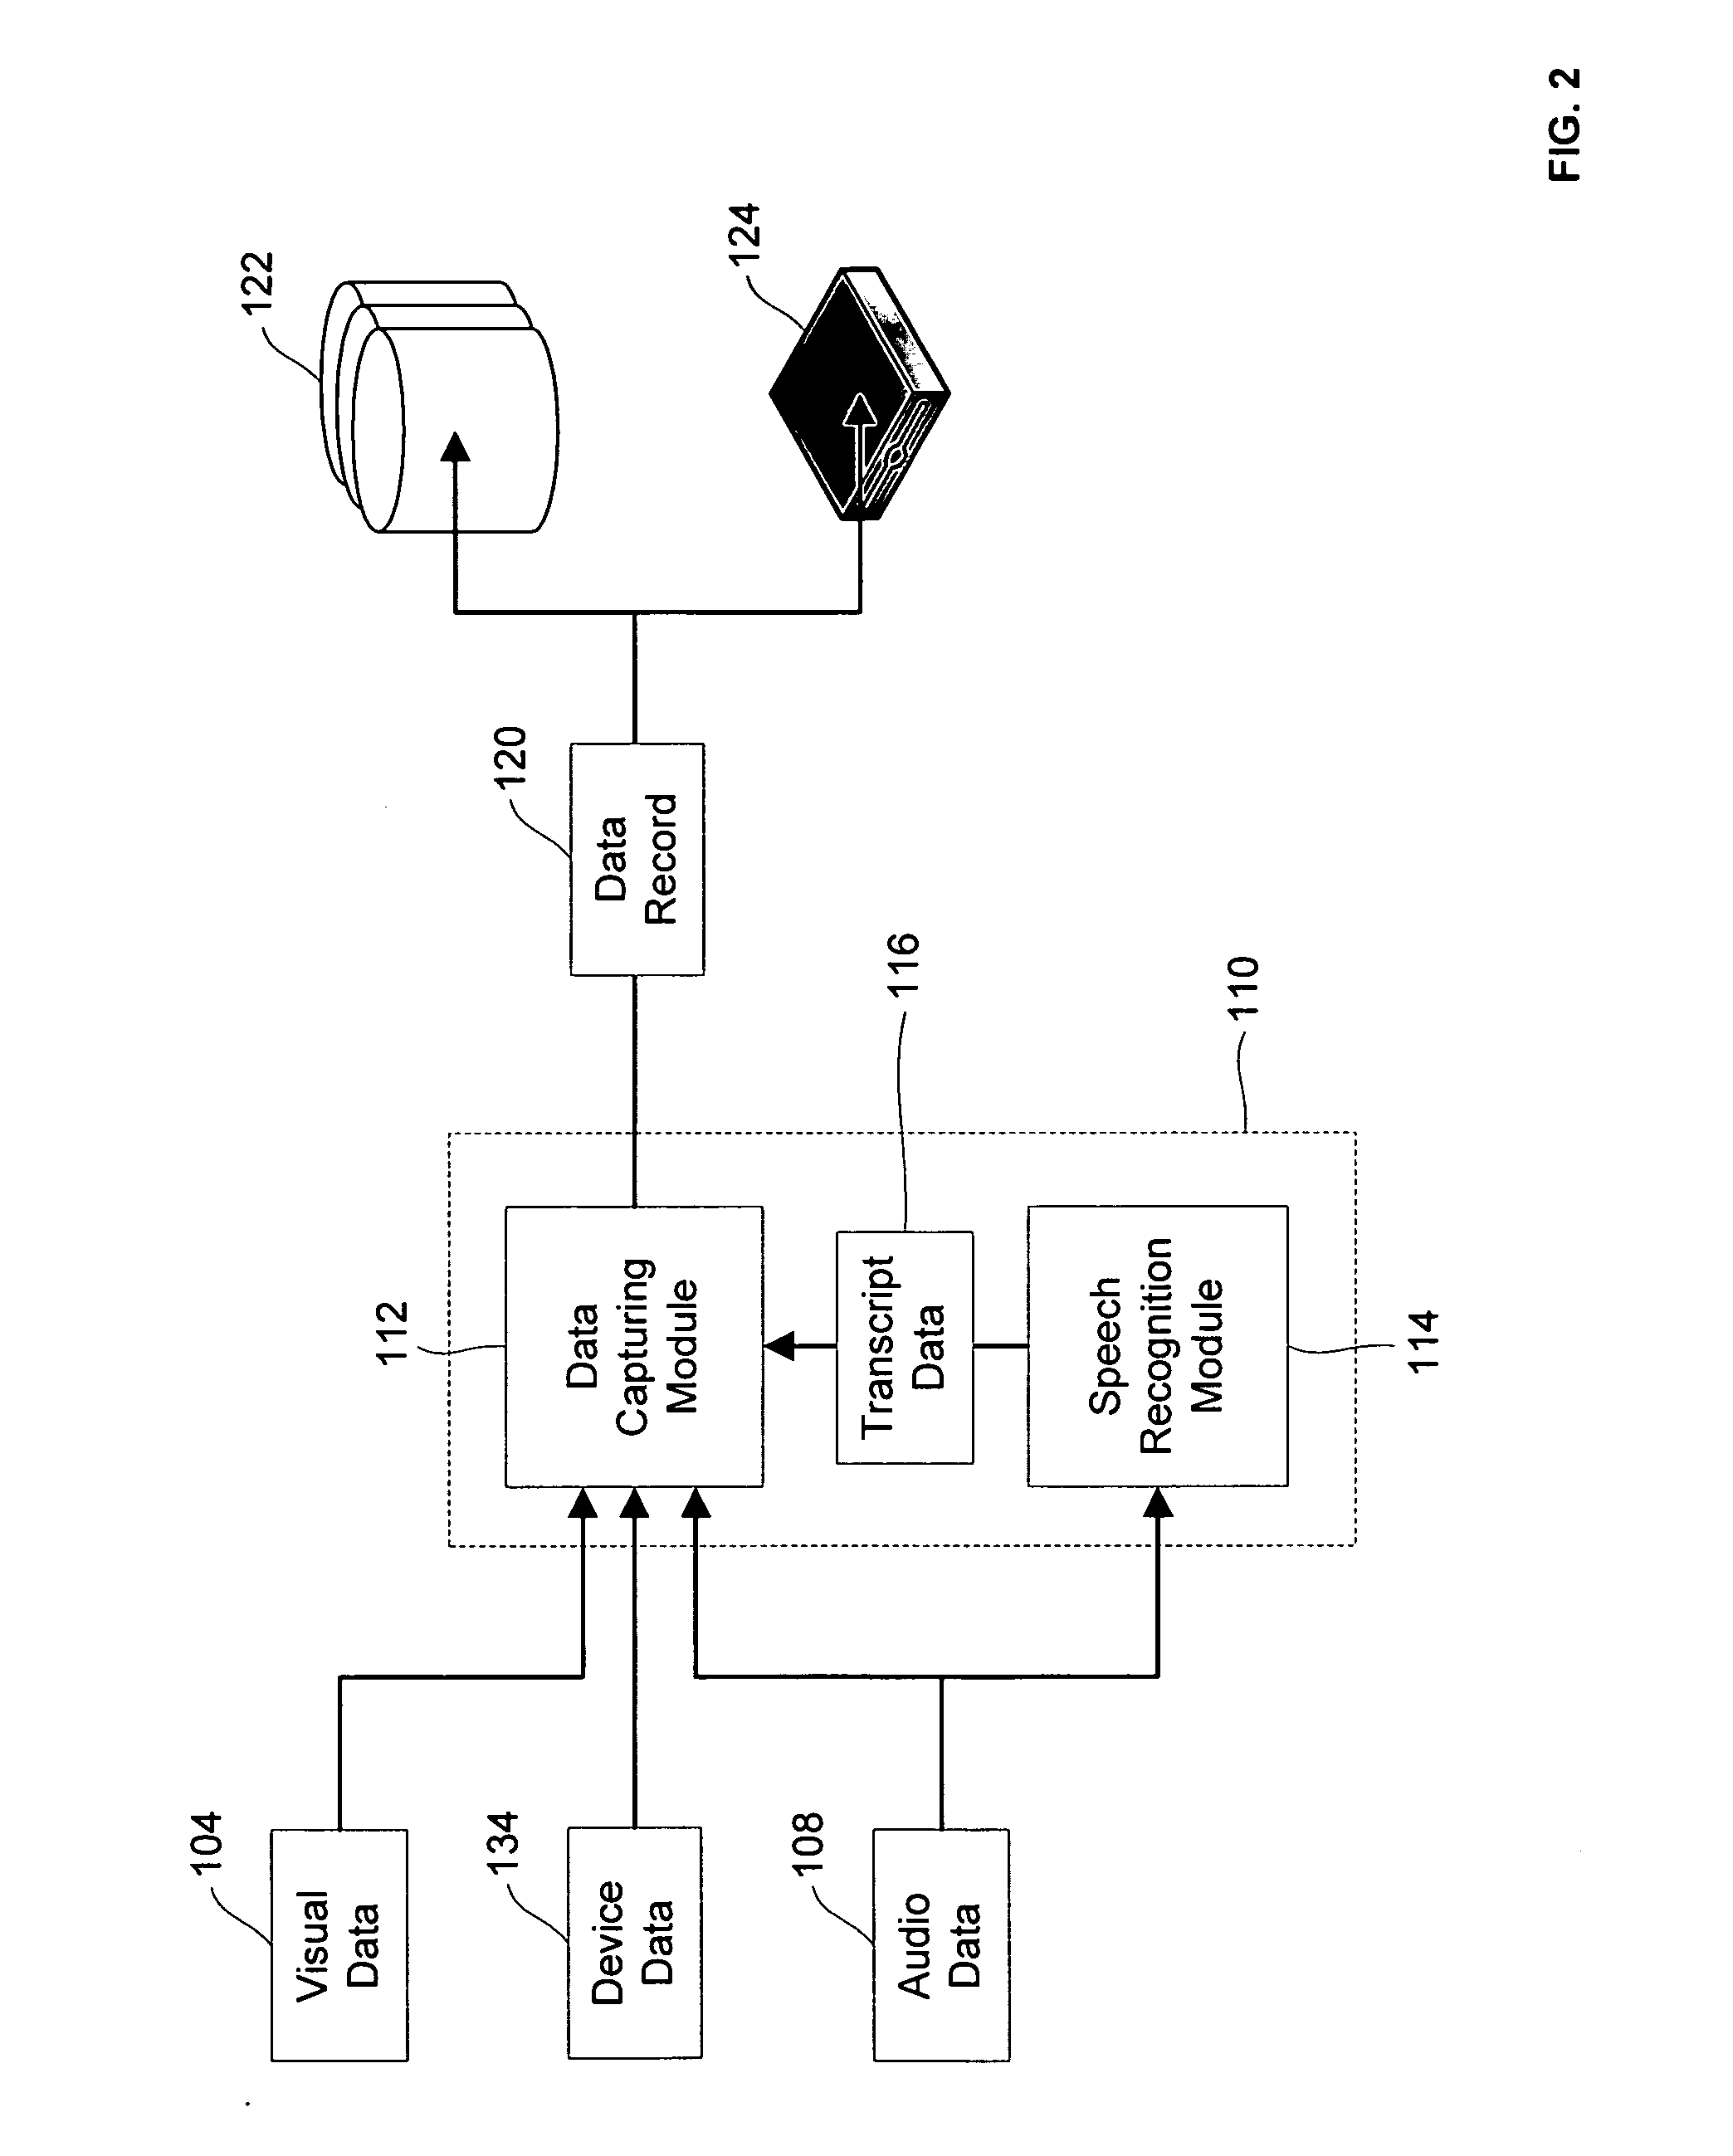 Audio, Visual and device data capturing system with real-time speech recognition command and control system